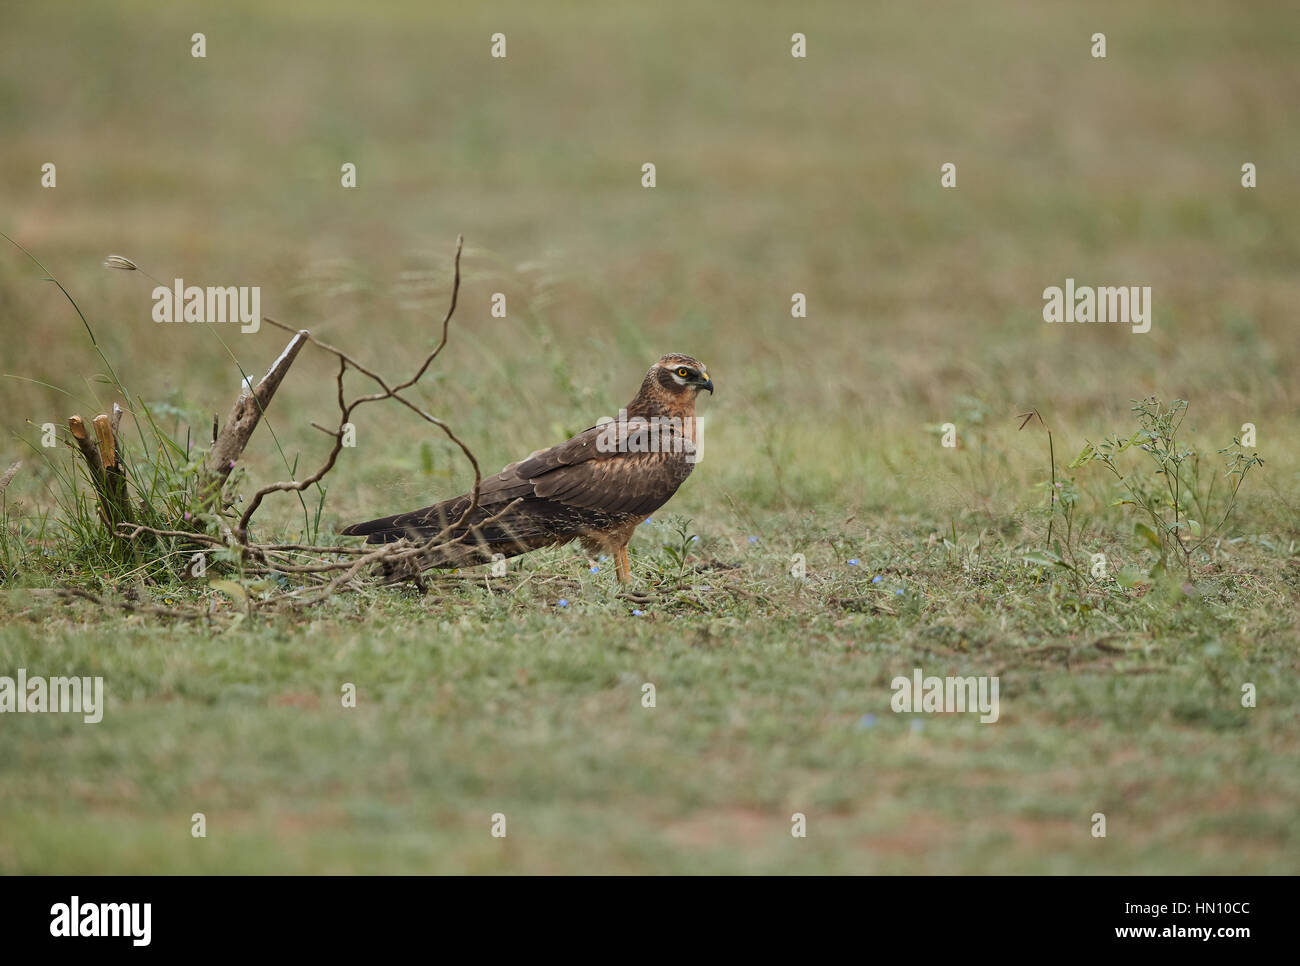 The Montagu's harrier (Circus pygargus) resting on the grassy habitat listening to the sounds of nature and having satisfactory midday meal Stock Photo